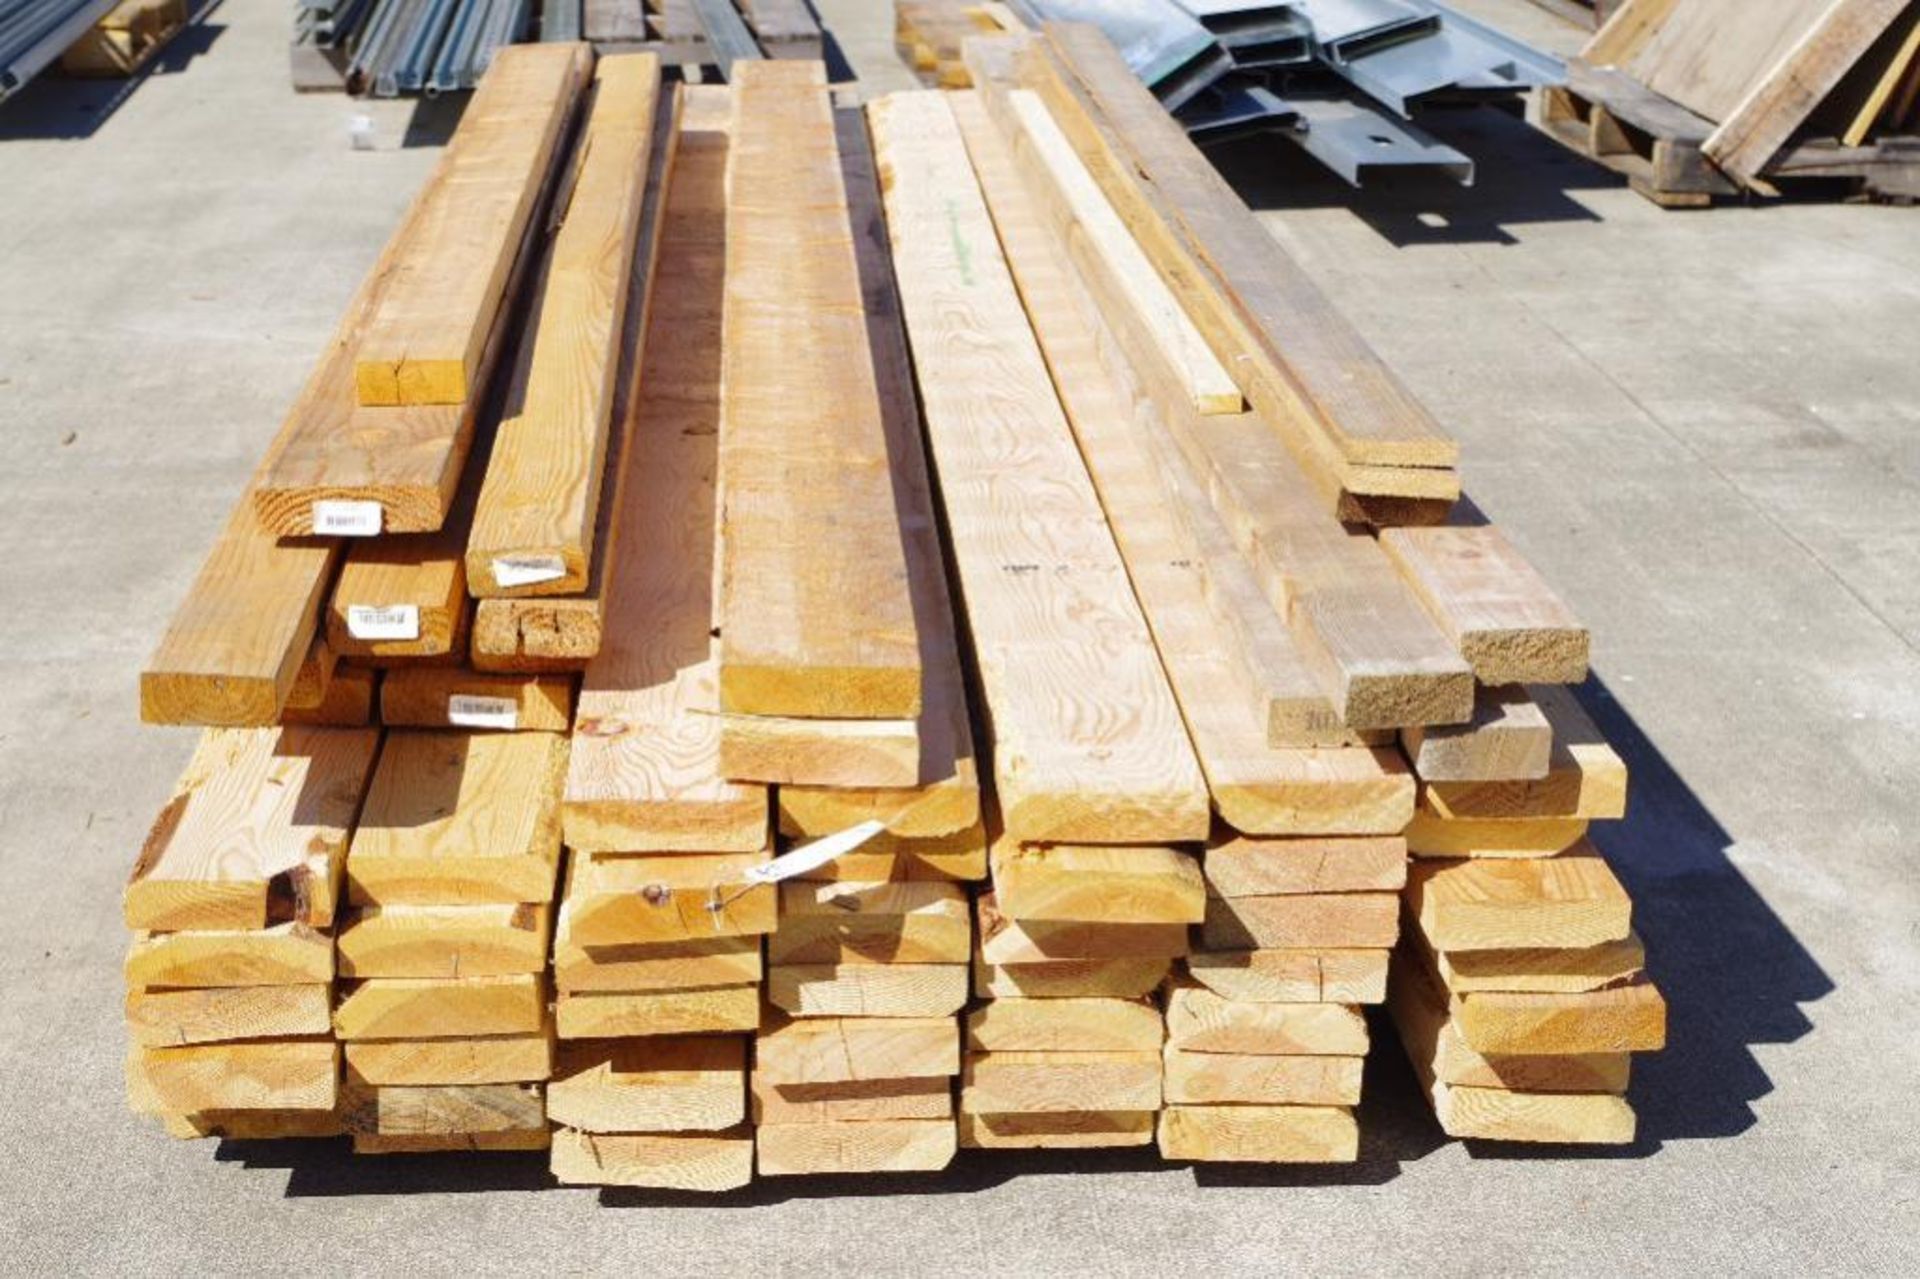 [QTY] Dimensional Lumber: Mostly 2x6 x 10'; Some 2x4 x 10' & 2x4 x 8'; Lumber has defects - Image 2 of 3